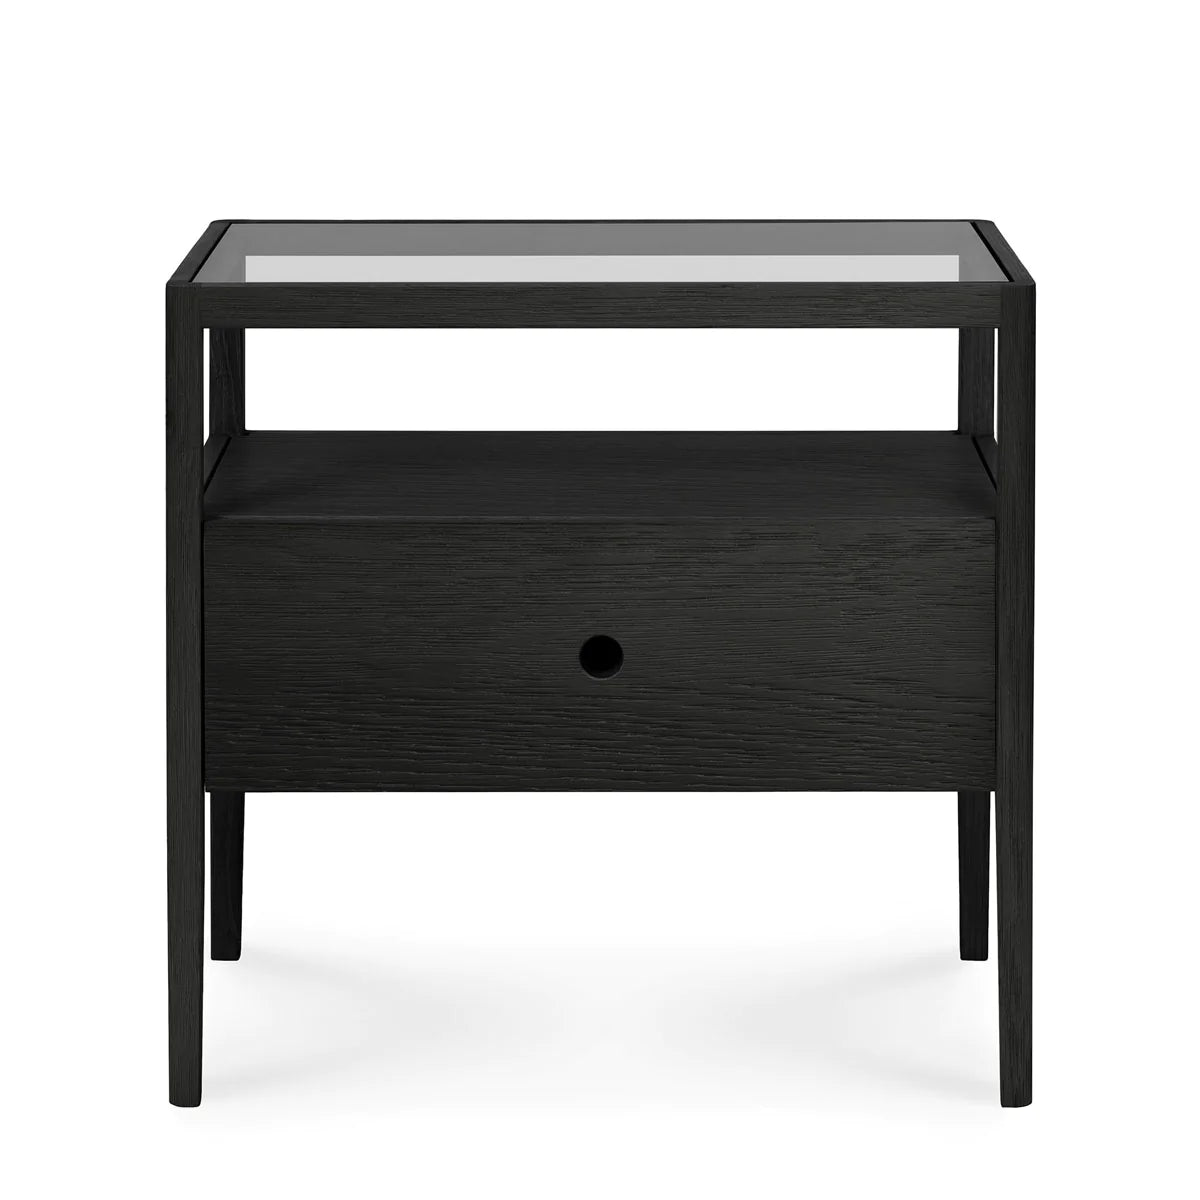 Ethnicraft Spindle Bedside Table in Black Oak is available from Make Your House A Home, Bendigo, Victoria, Australia